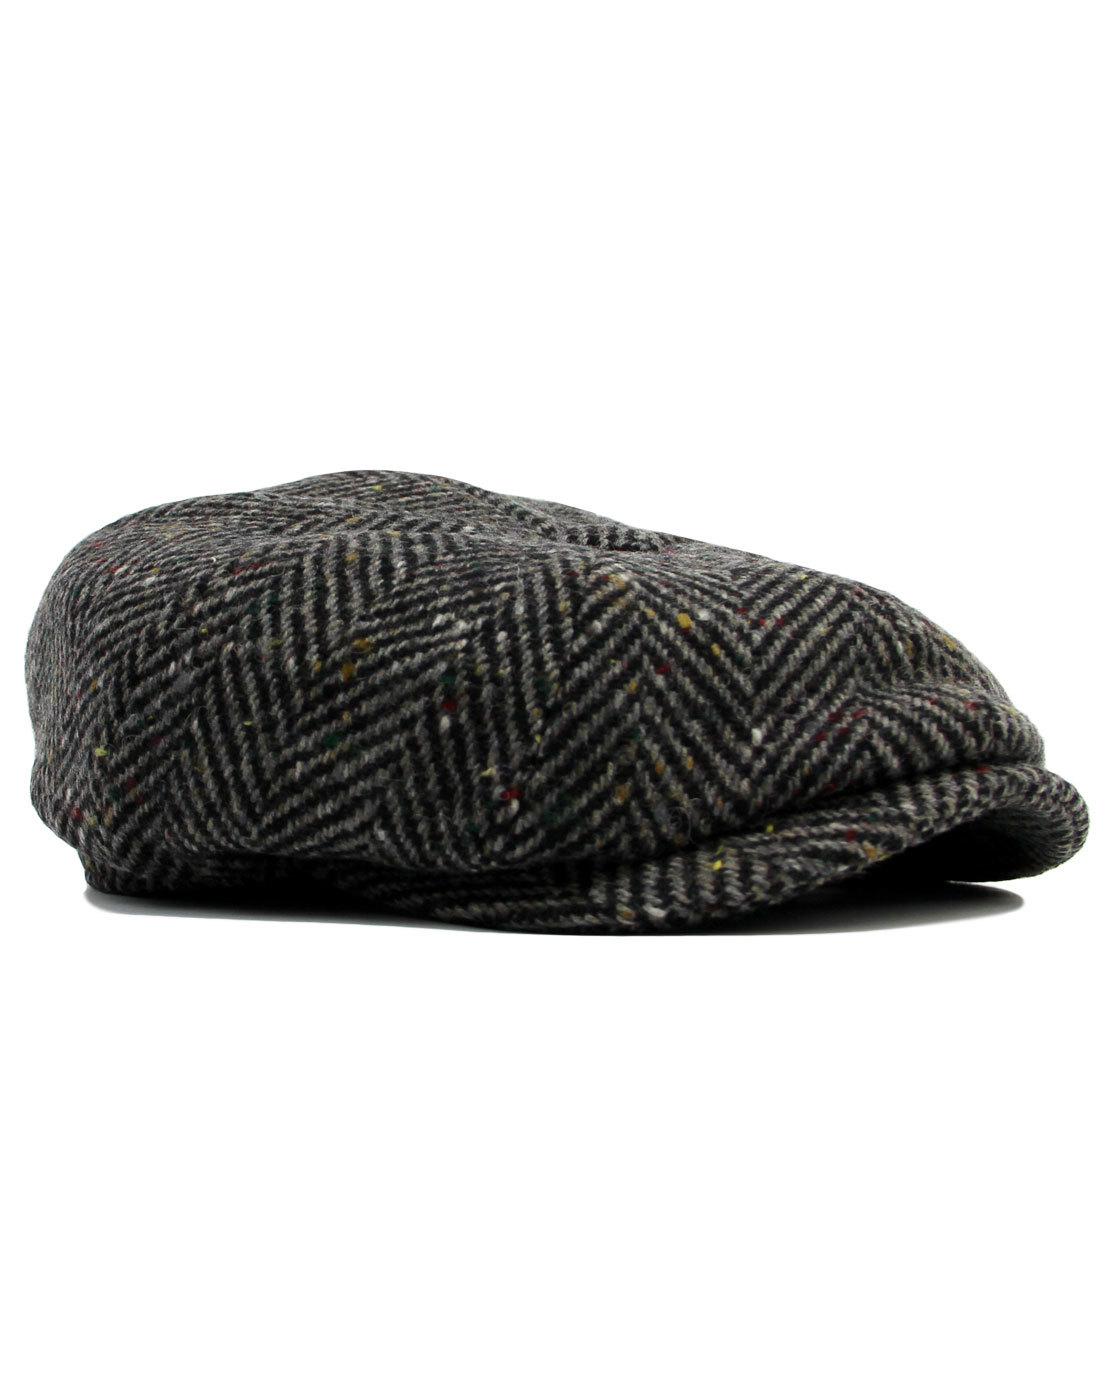 Donegal Mayo FAILSWORTH Mod Magee Wool Gatsby Cap